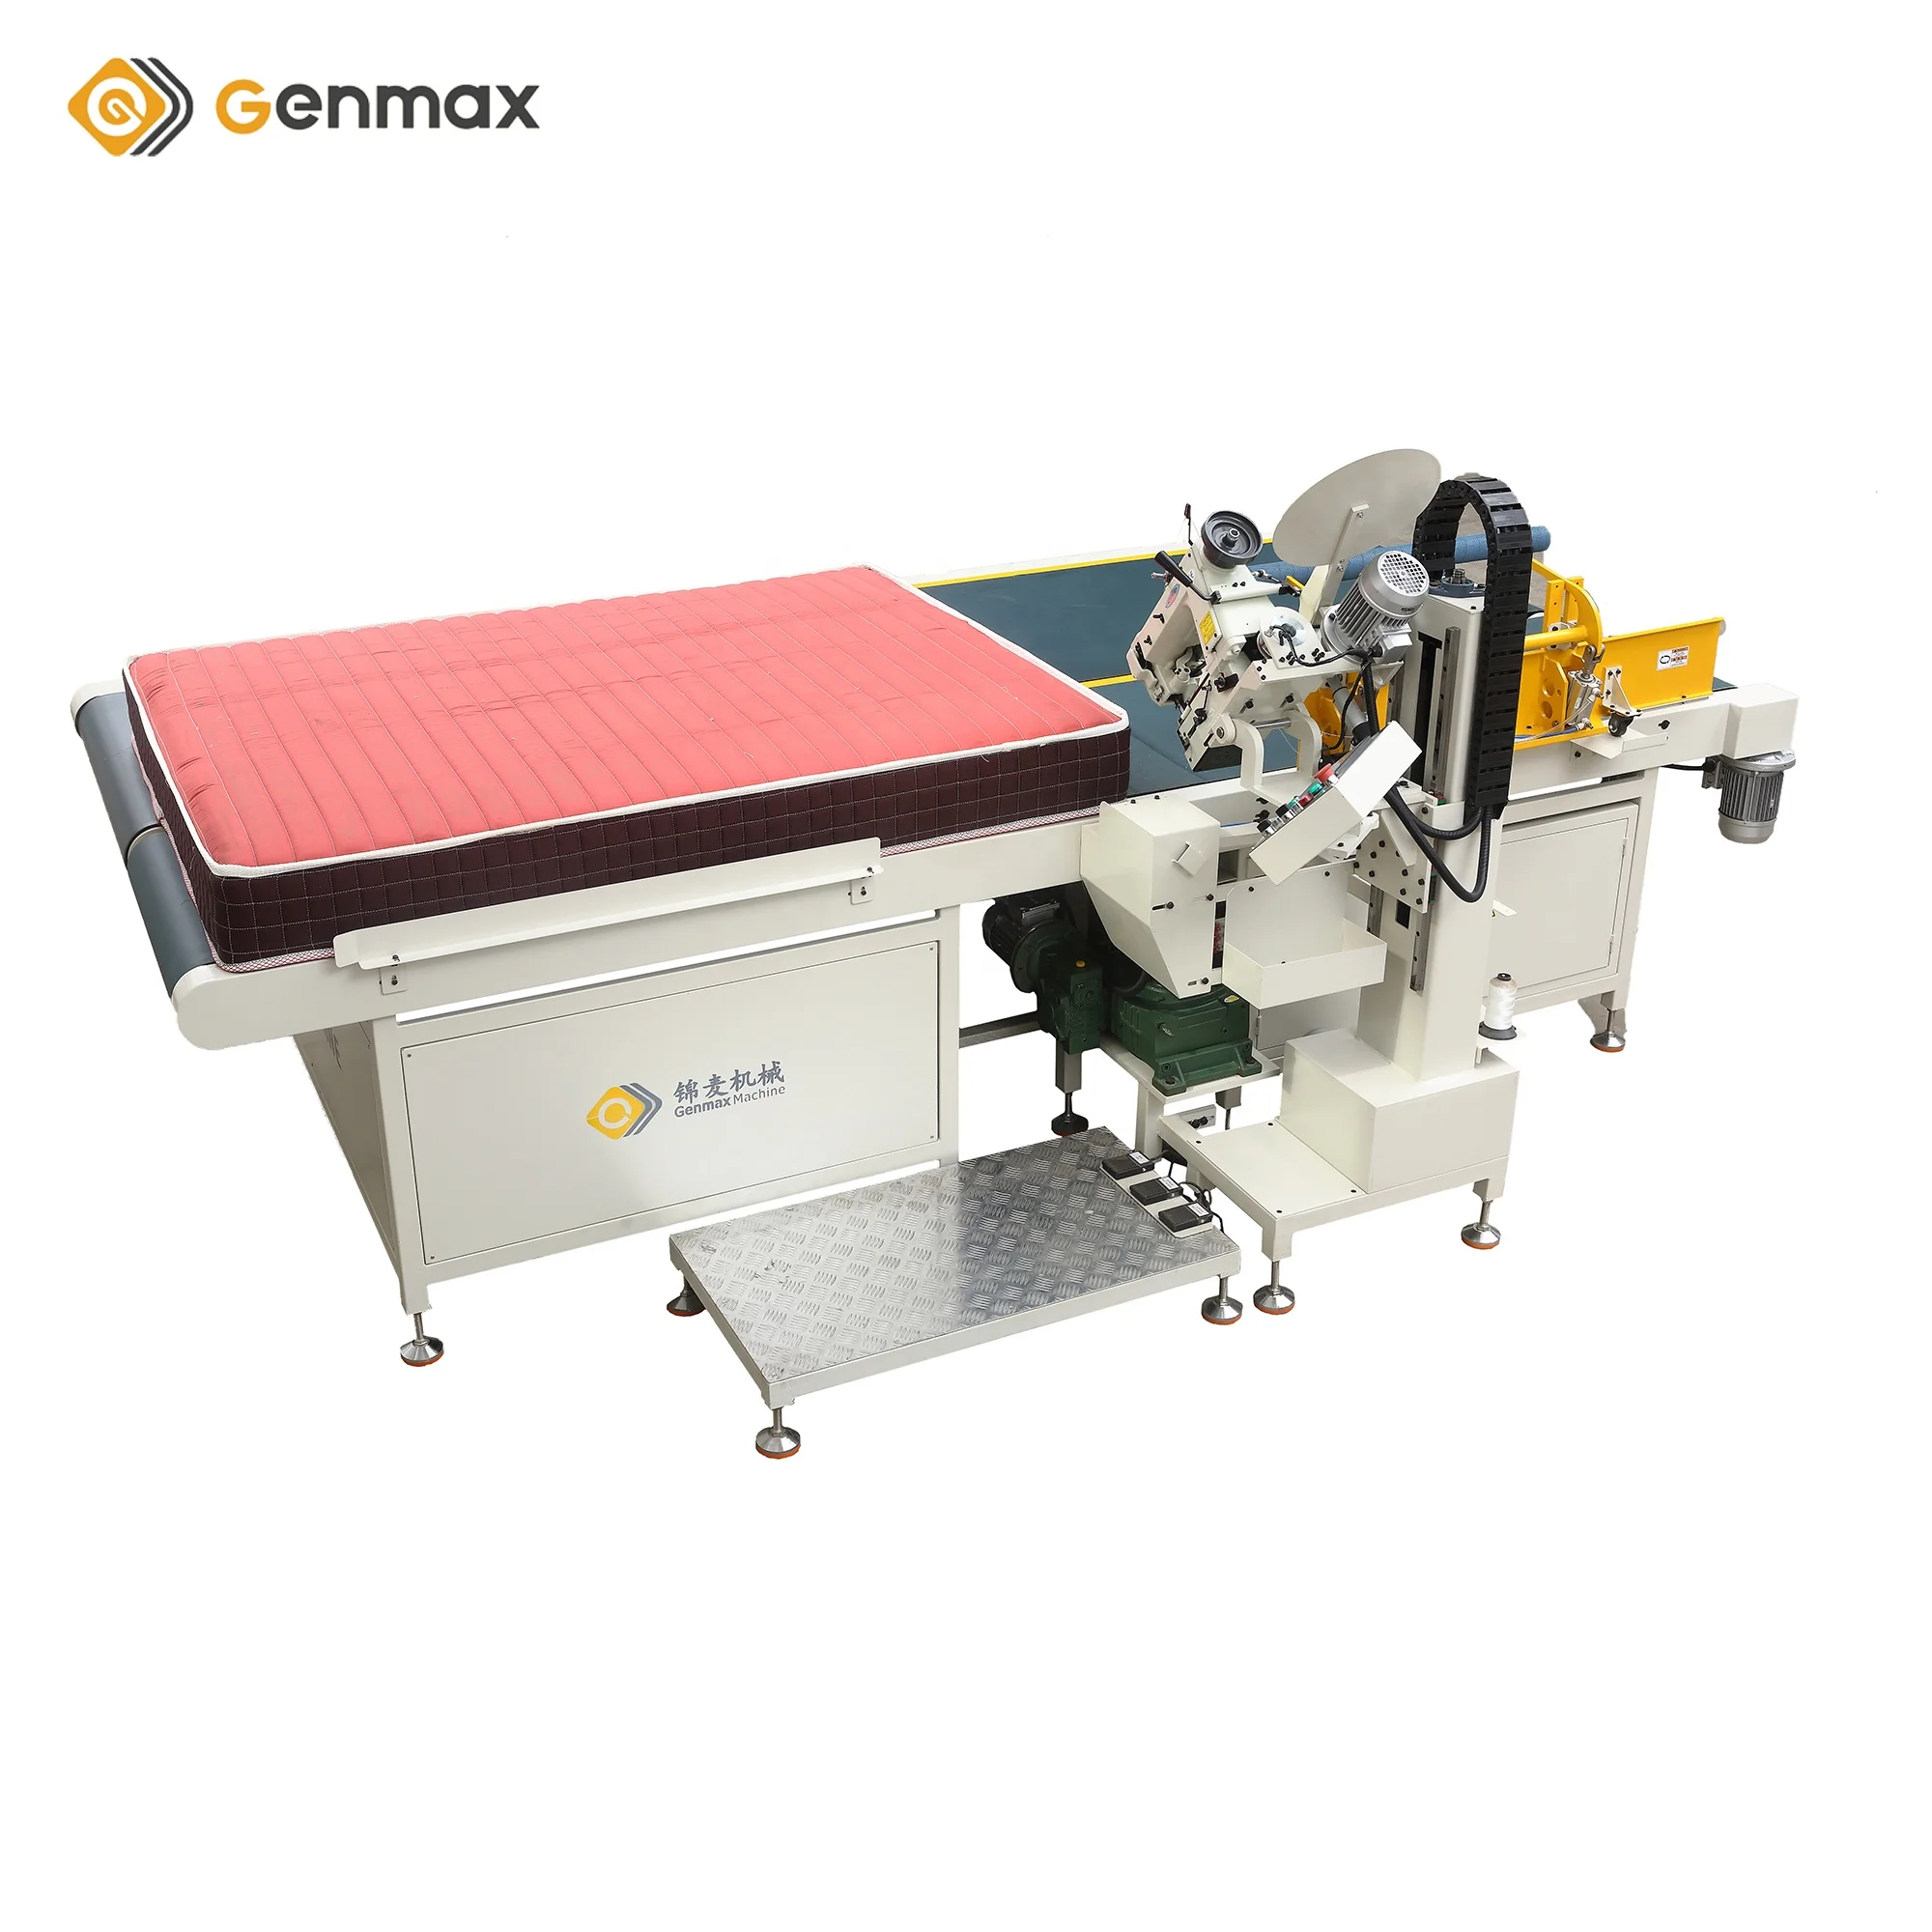 Fully Automatic flipping Mattress Tape Edge Machine Original Sewing Head For Mquina De Coser Colchones